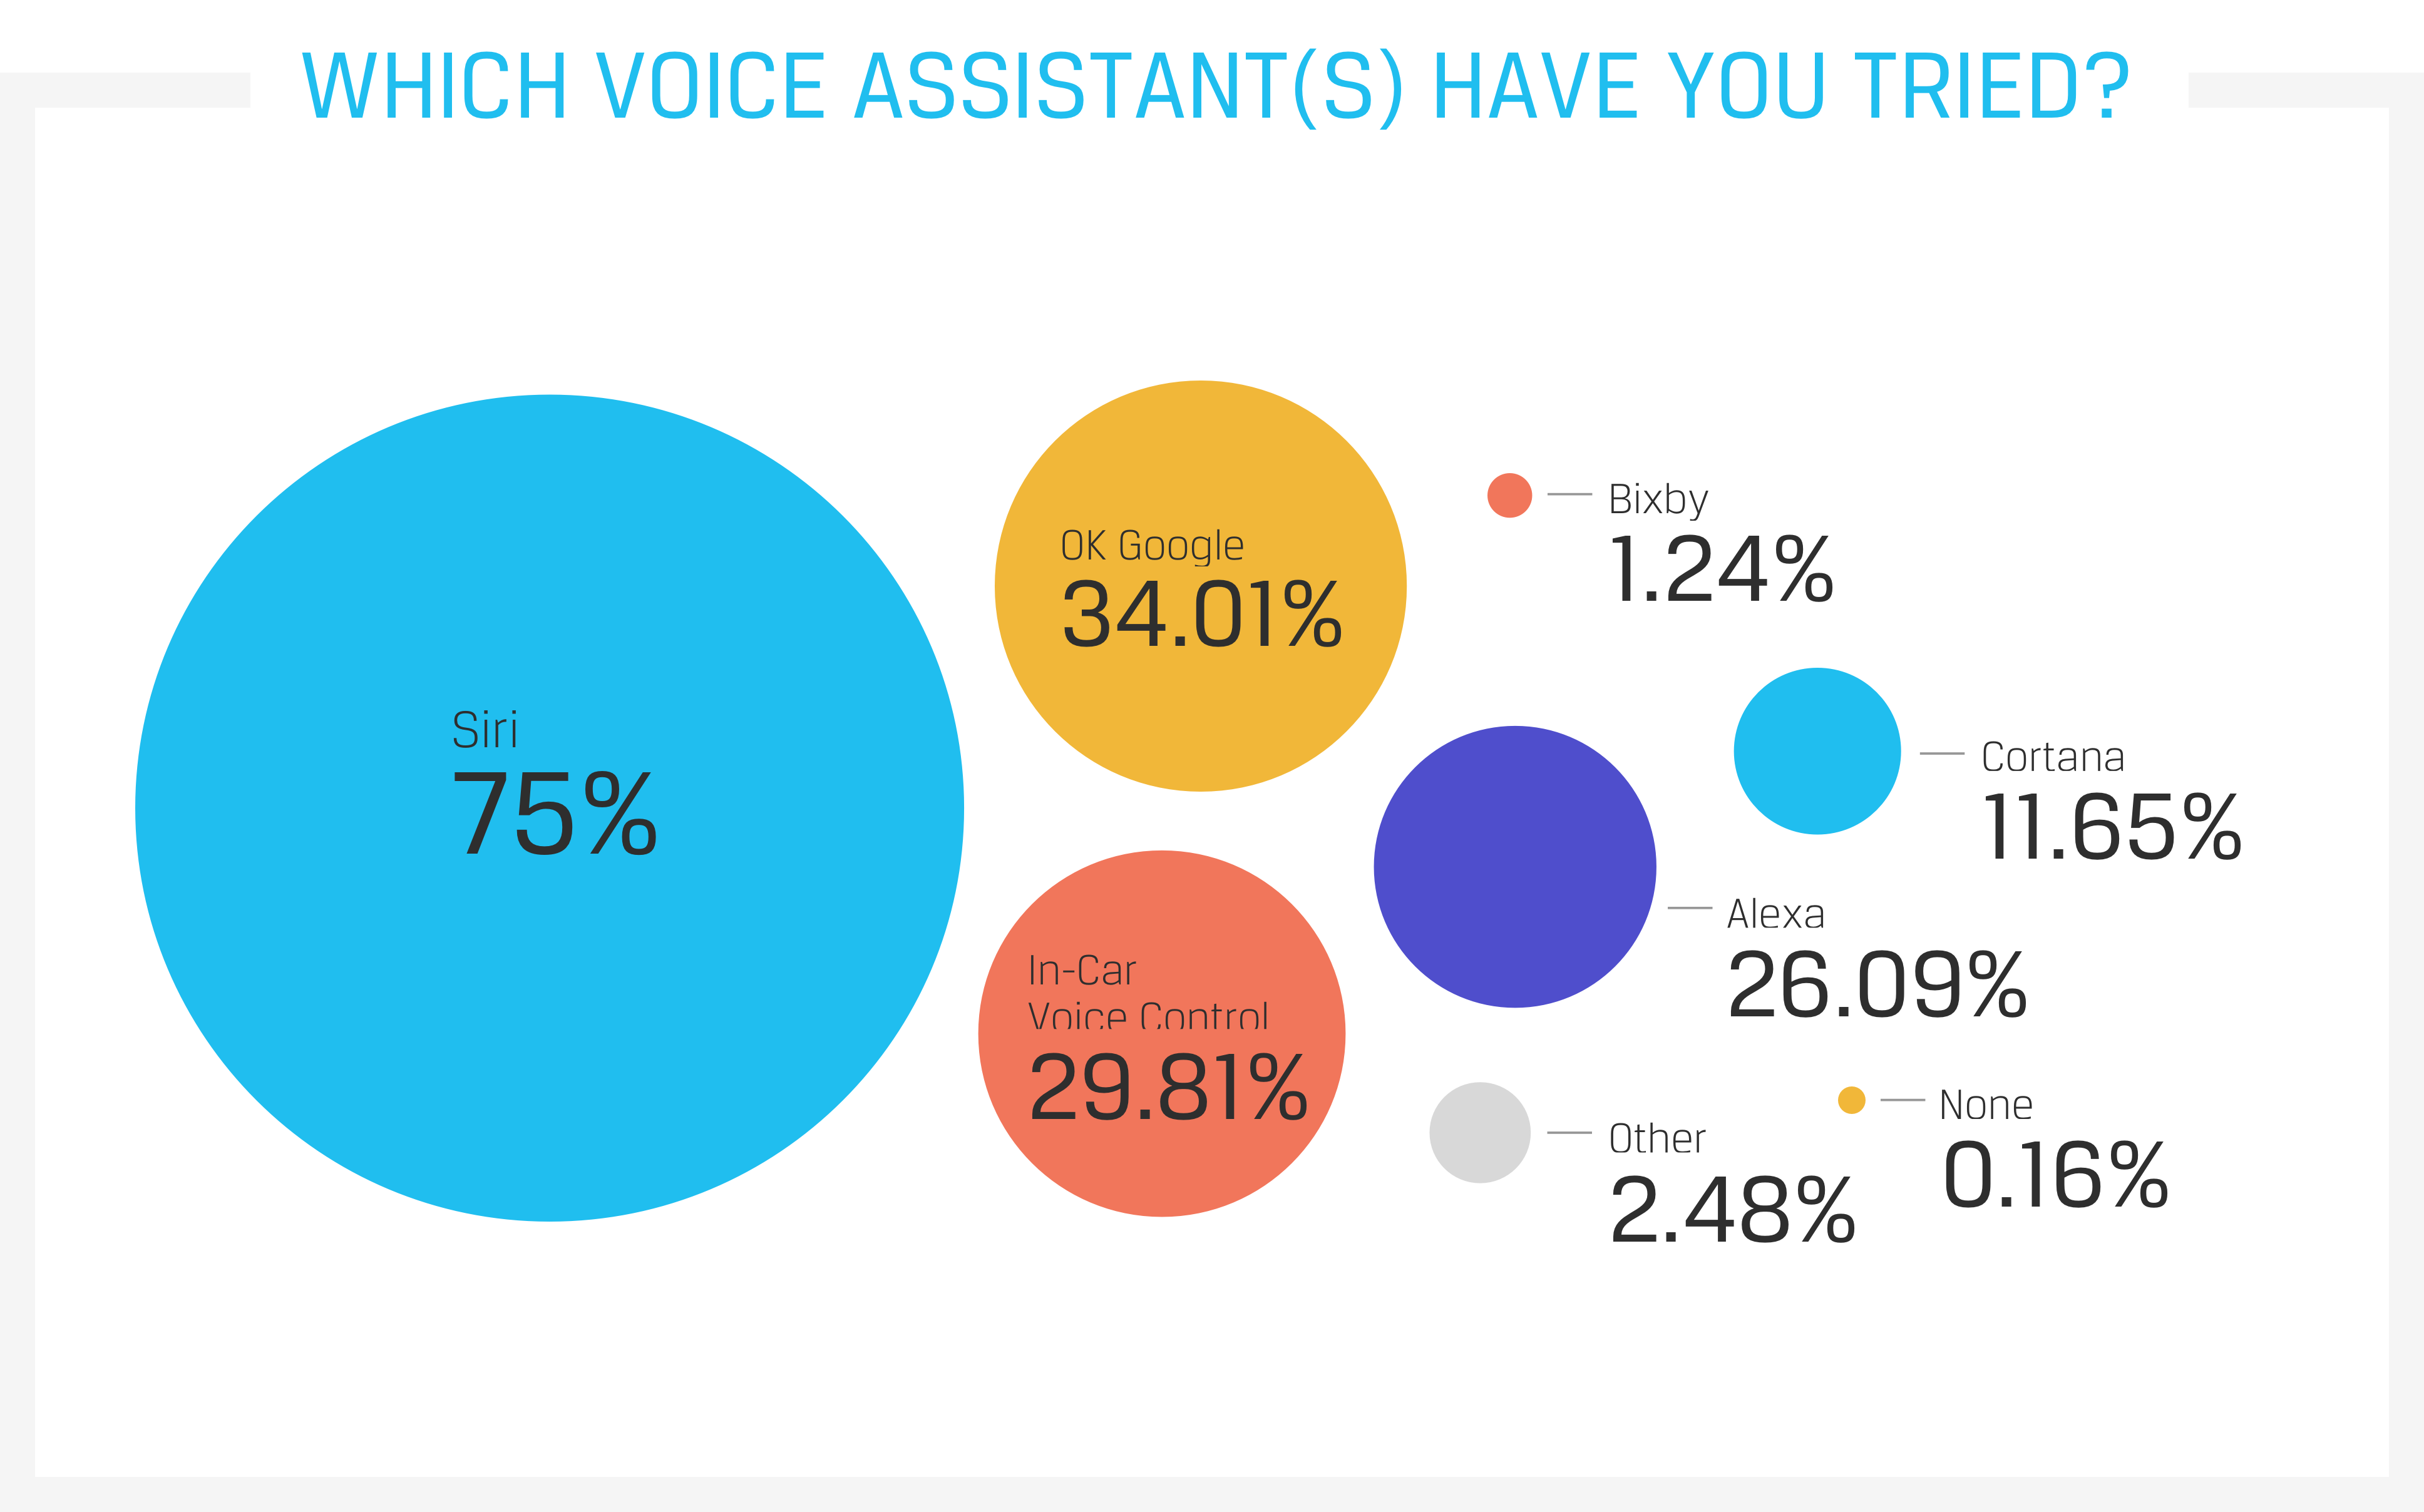 Which voice assistant(s) have you tried?